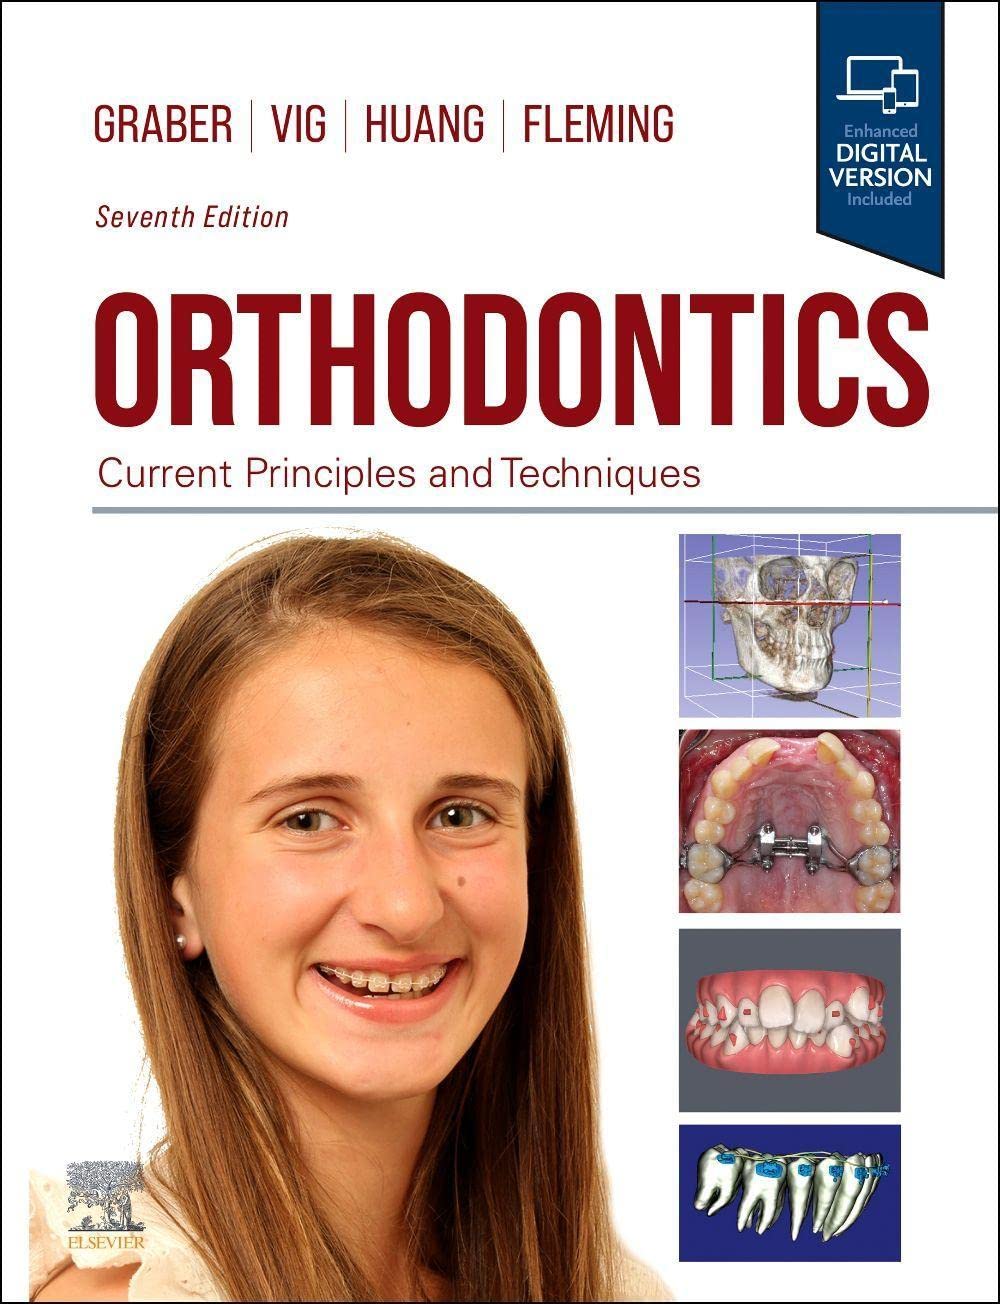 Orthodontics: Current Principles and Techniques, 7th Edition  by  Lee W. Graber DDS MS MS PhD 